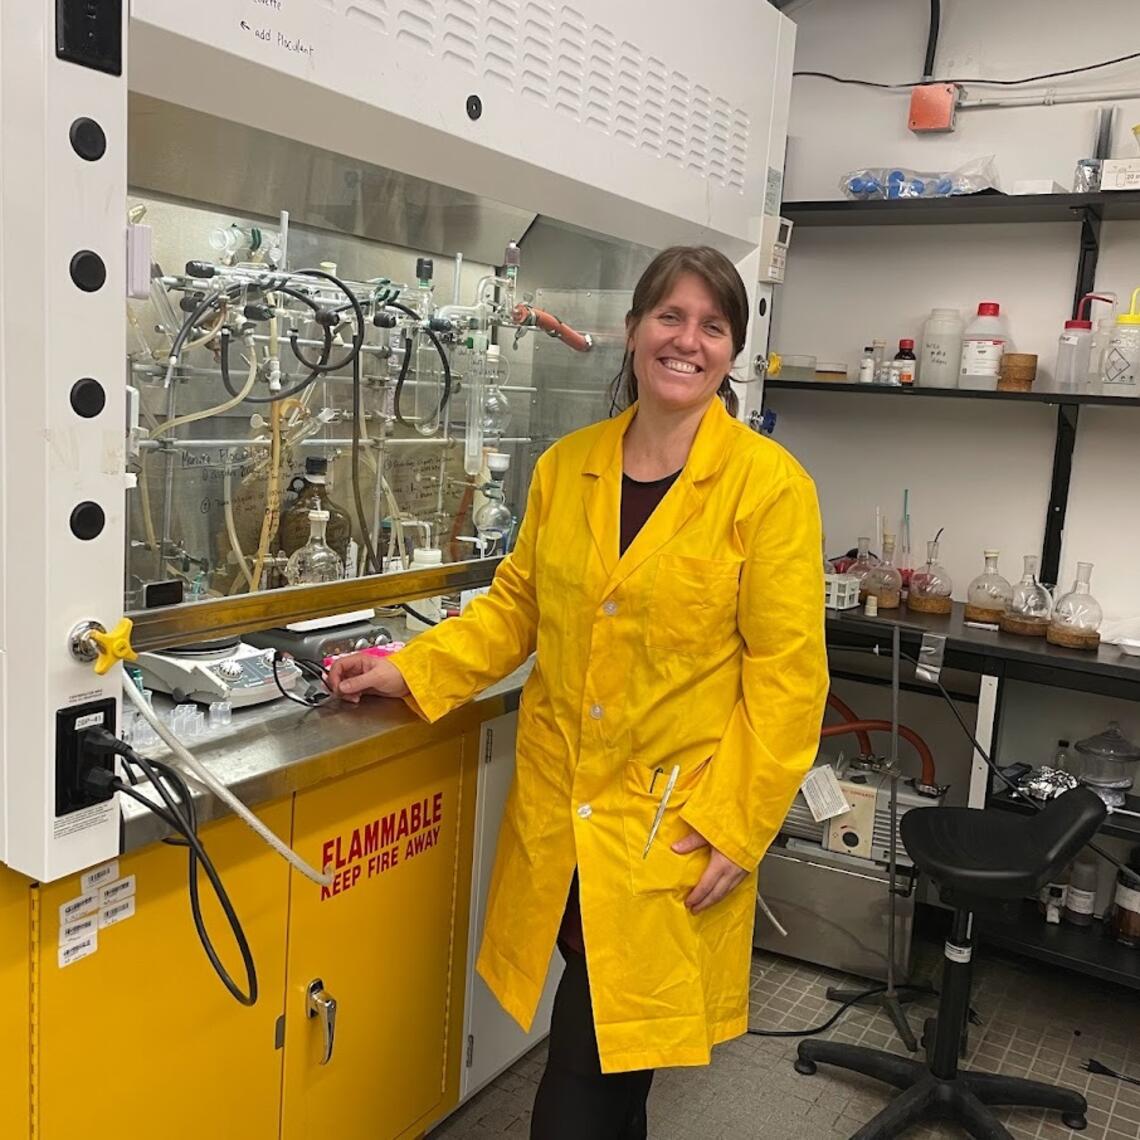 A woman in a yellow lab coat stands in a lab and smiles at the camera